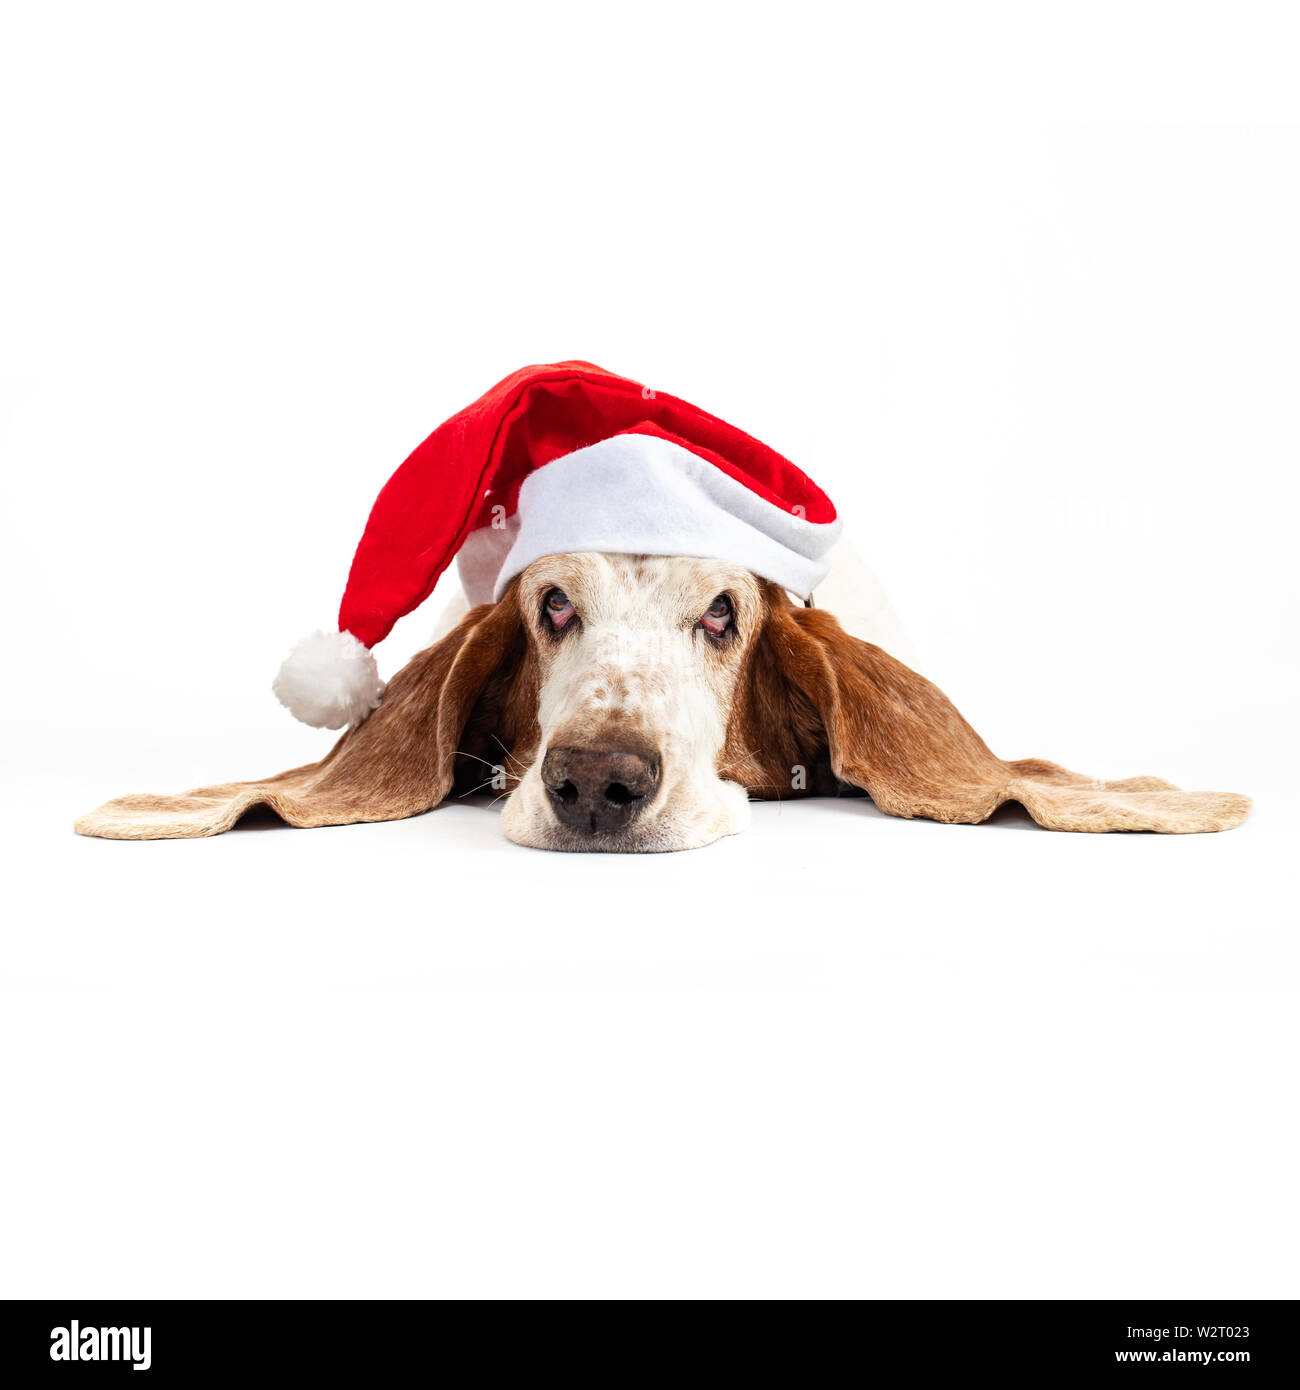 Tinkerbelle the Basset Hound wearing a christmas hat and laing on a white backgrand Stock Photo